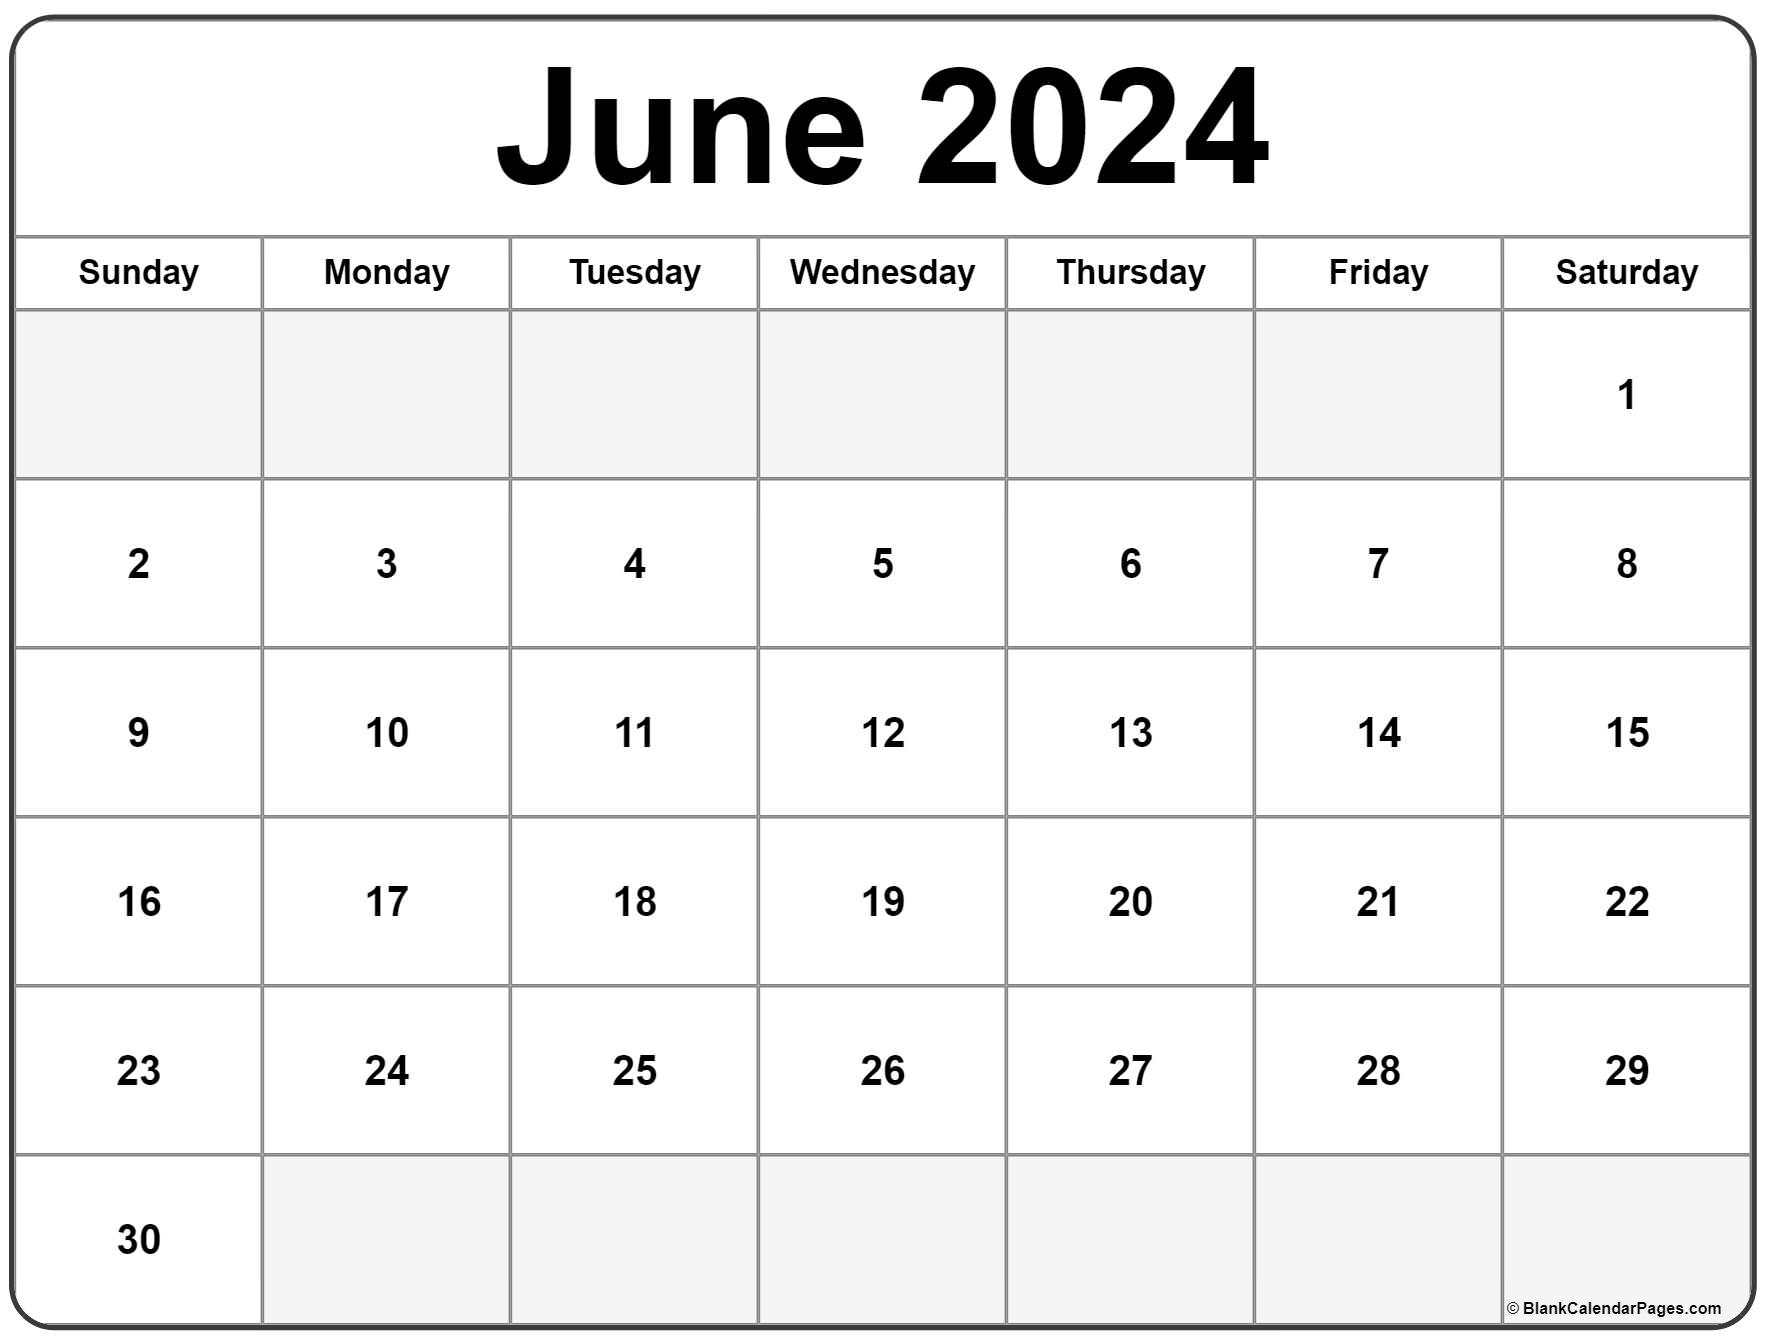 June 2024 Calendar Template Plan Your Month with Ease Free 2024